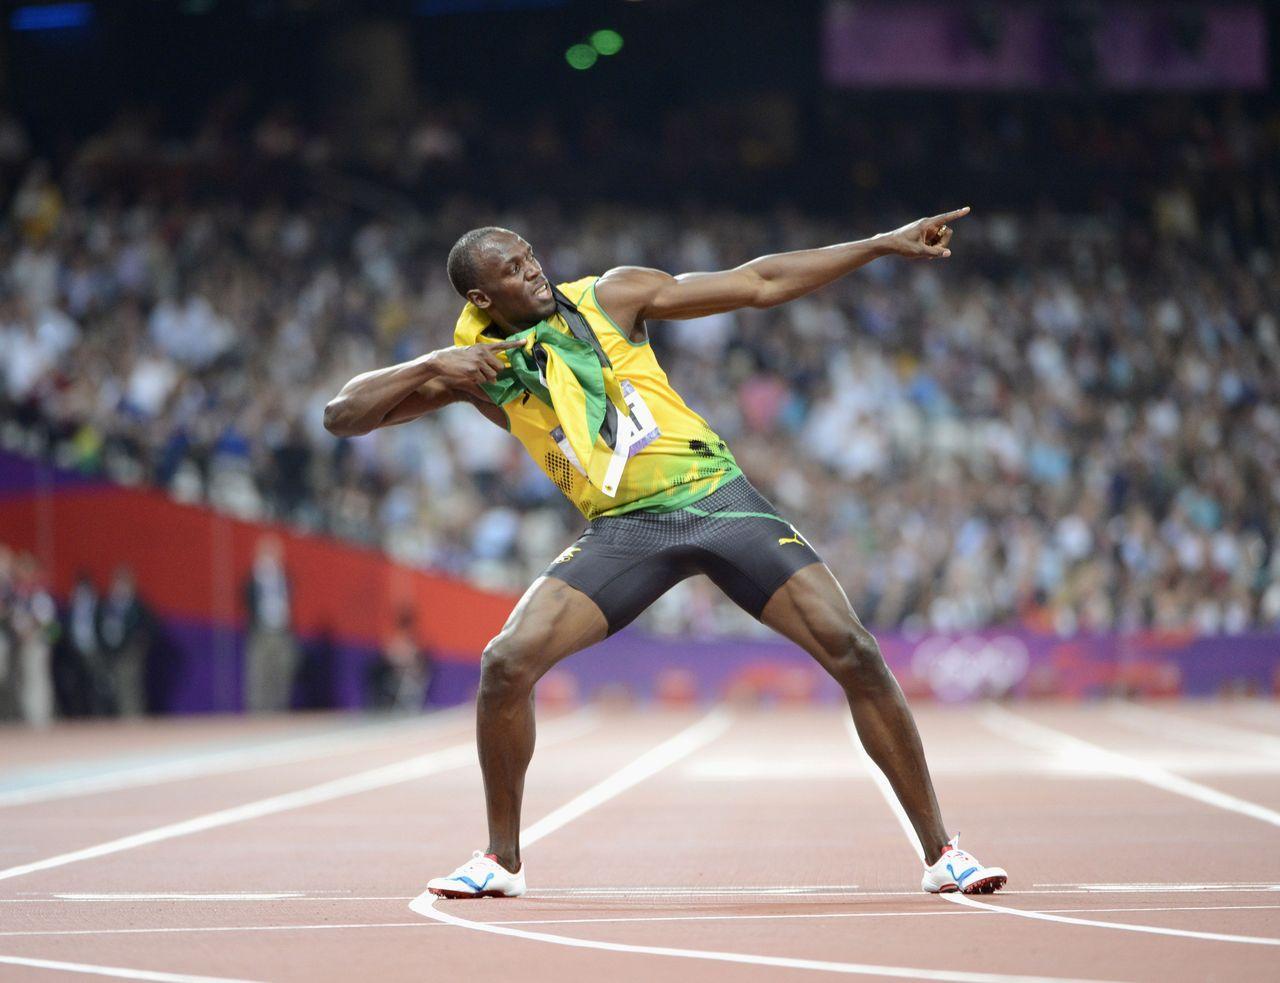 Download Usain Bolt Striking Pose Crowd Watches Wallpaper | Wallpapers.com